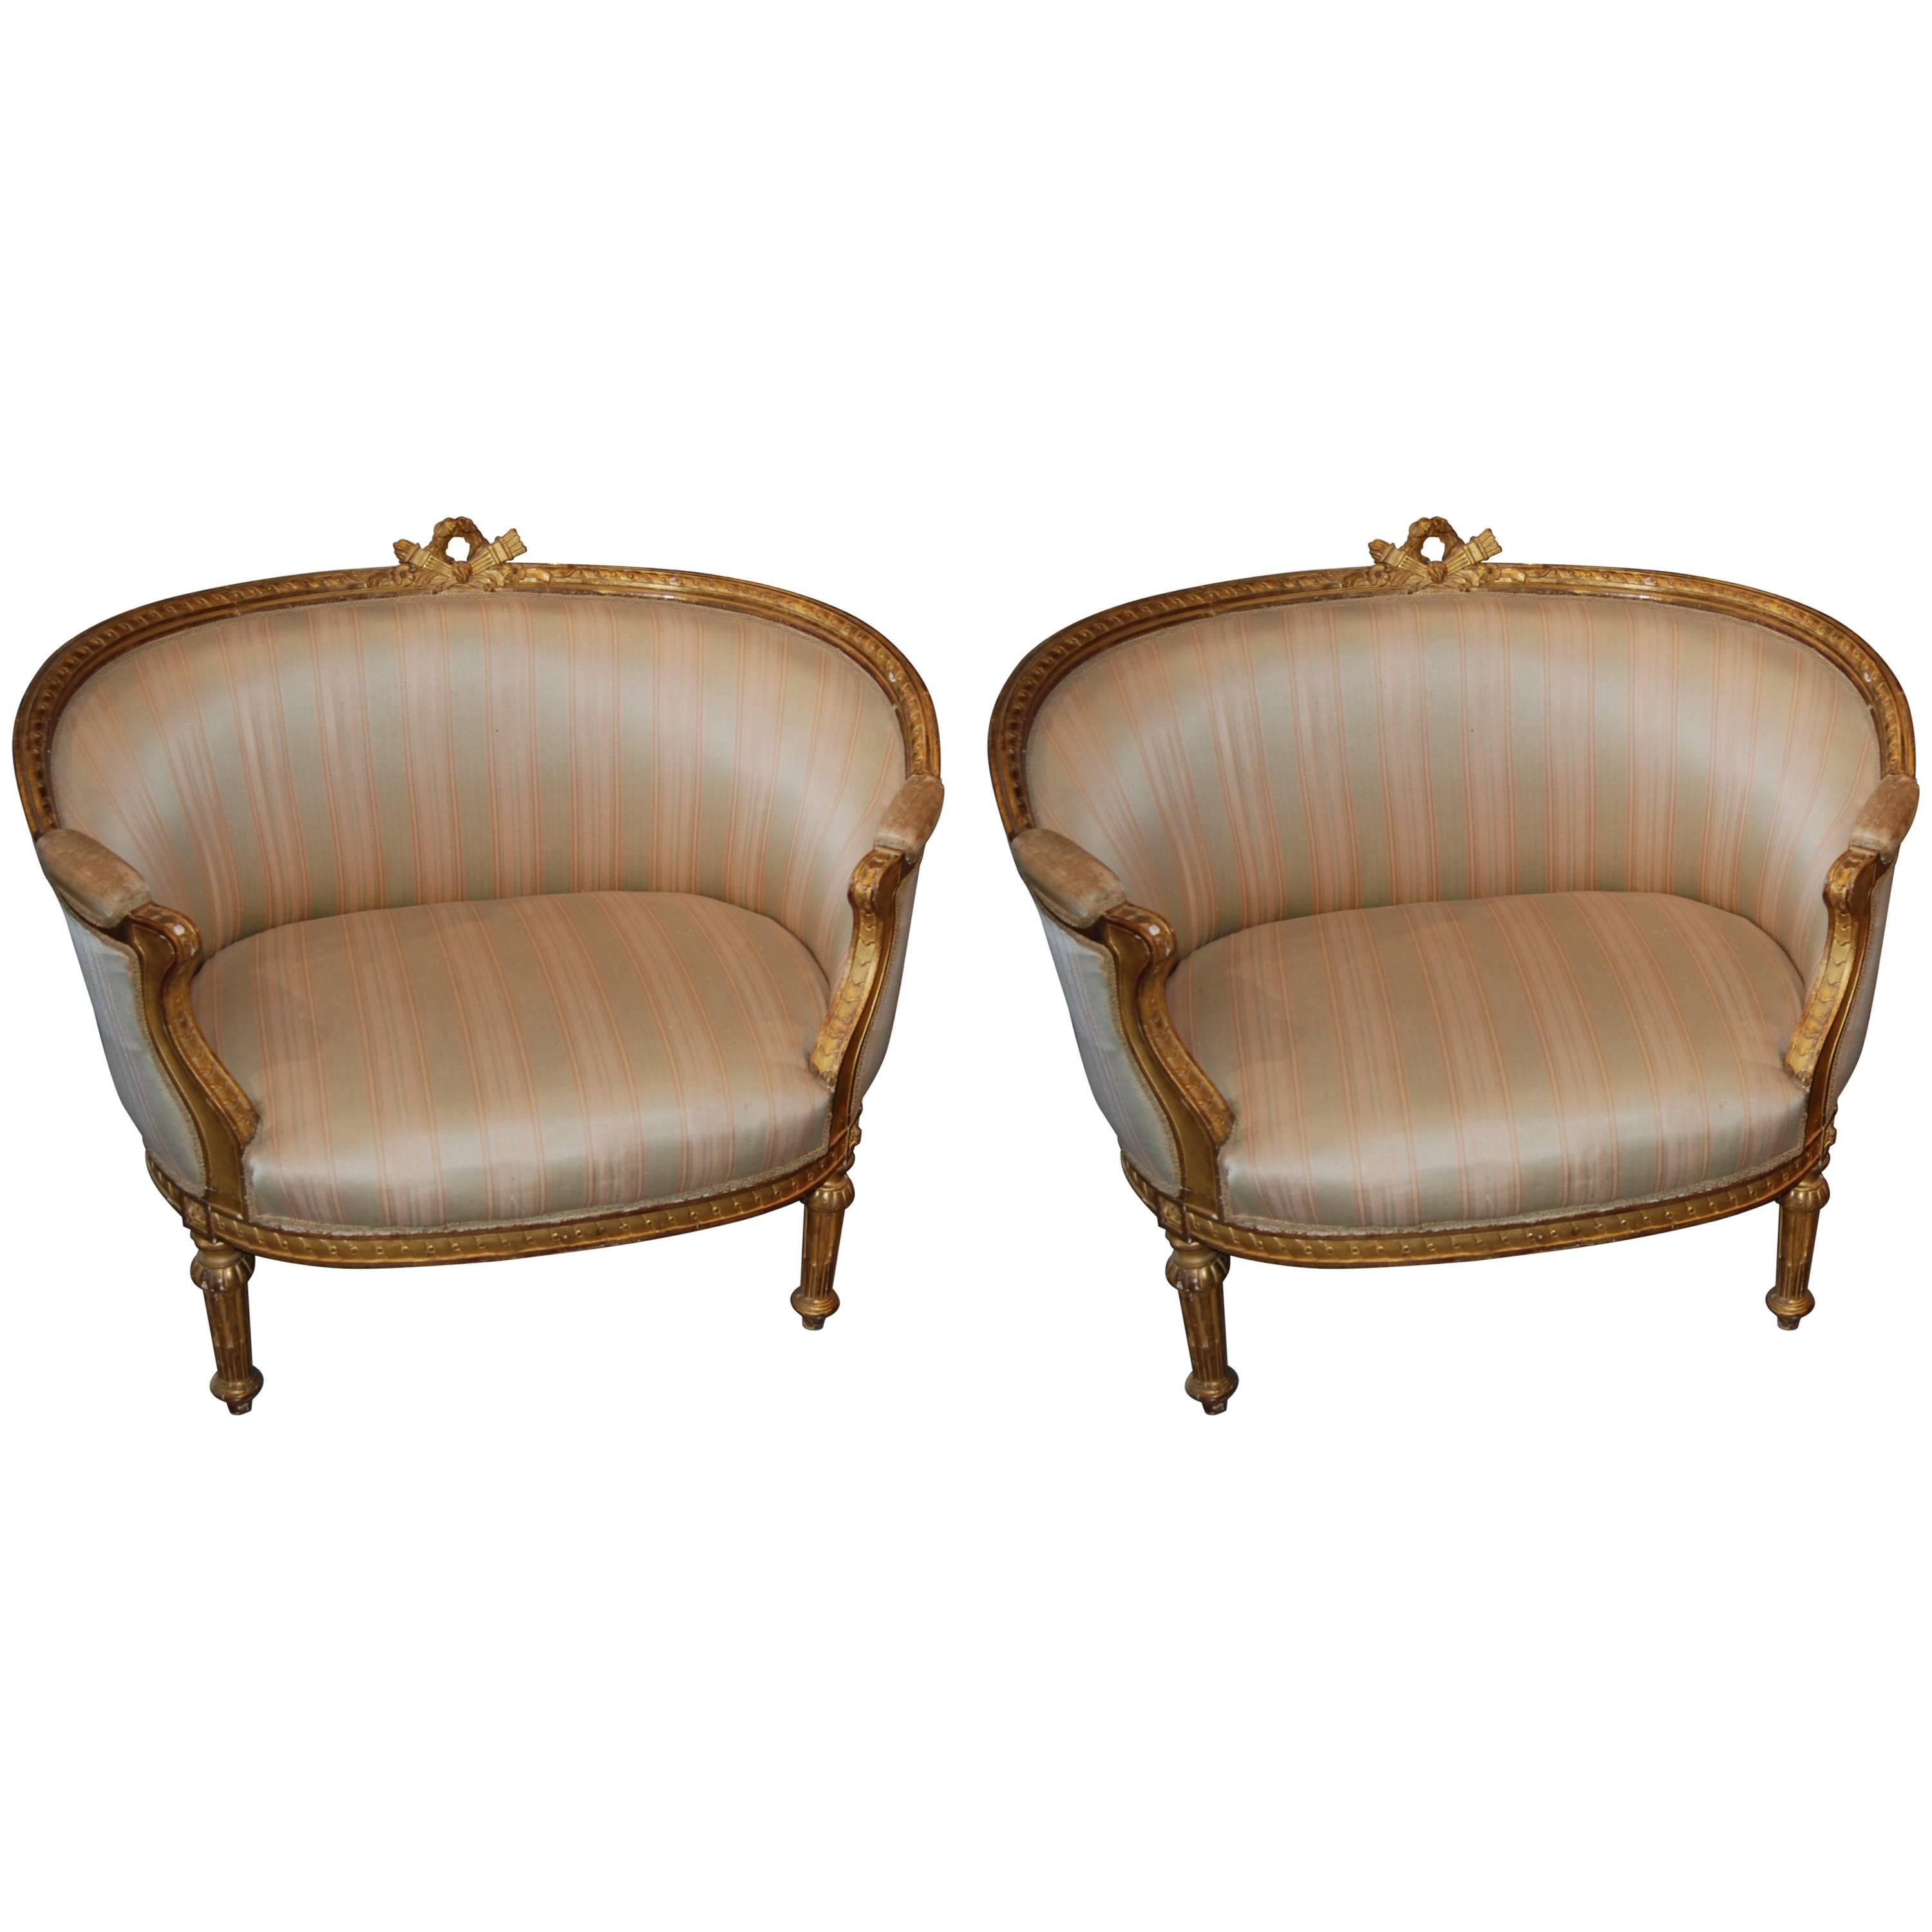 Exceptional Pair of Carved and Gilded Marquis Armchairs